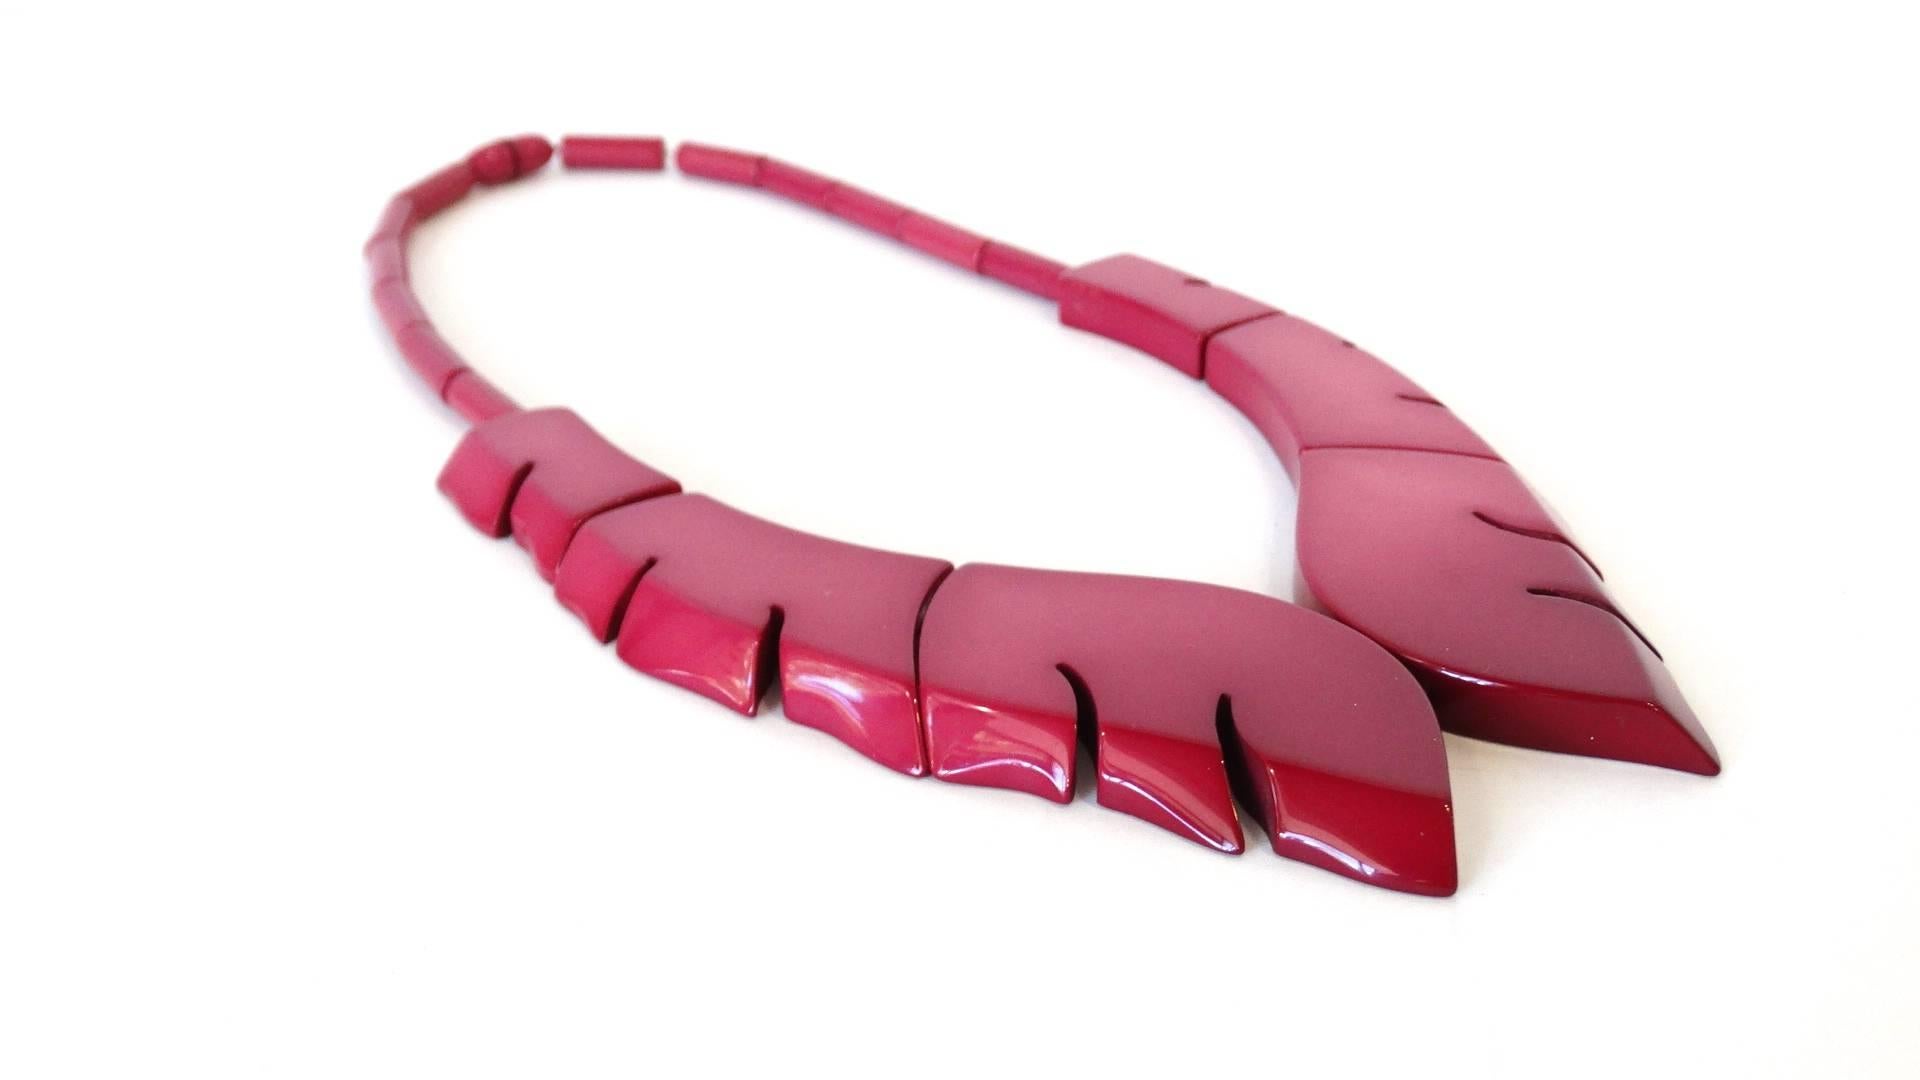 The most amazing 1970s bakelite necklace from none other than Guillemette L'Hoir Paris- designer of avant-garde art inspired jewelry made from Galalith. This piece is made out of ombre magenta bakelite, arranged in a wavy, collar like structure.